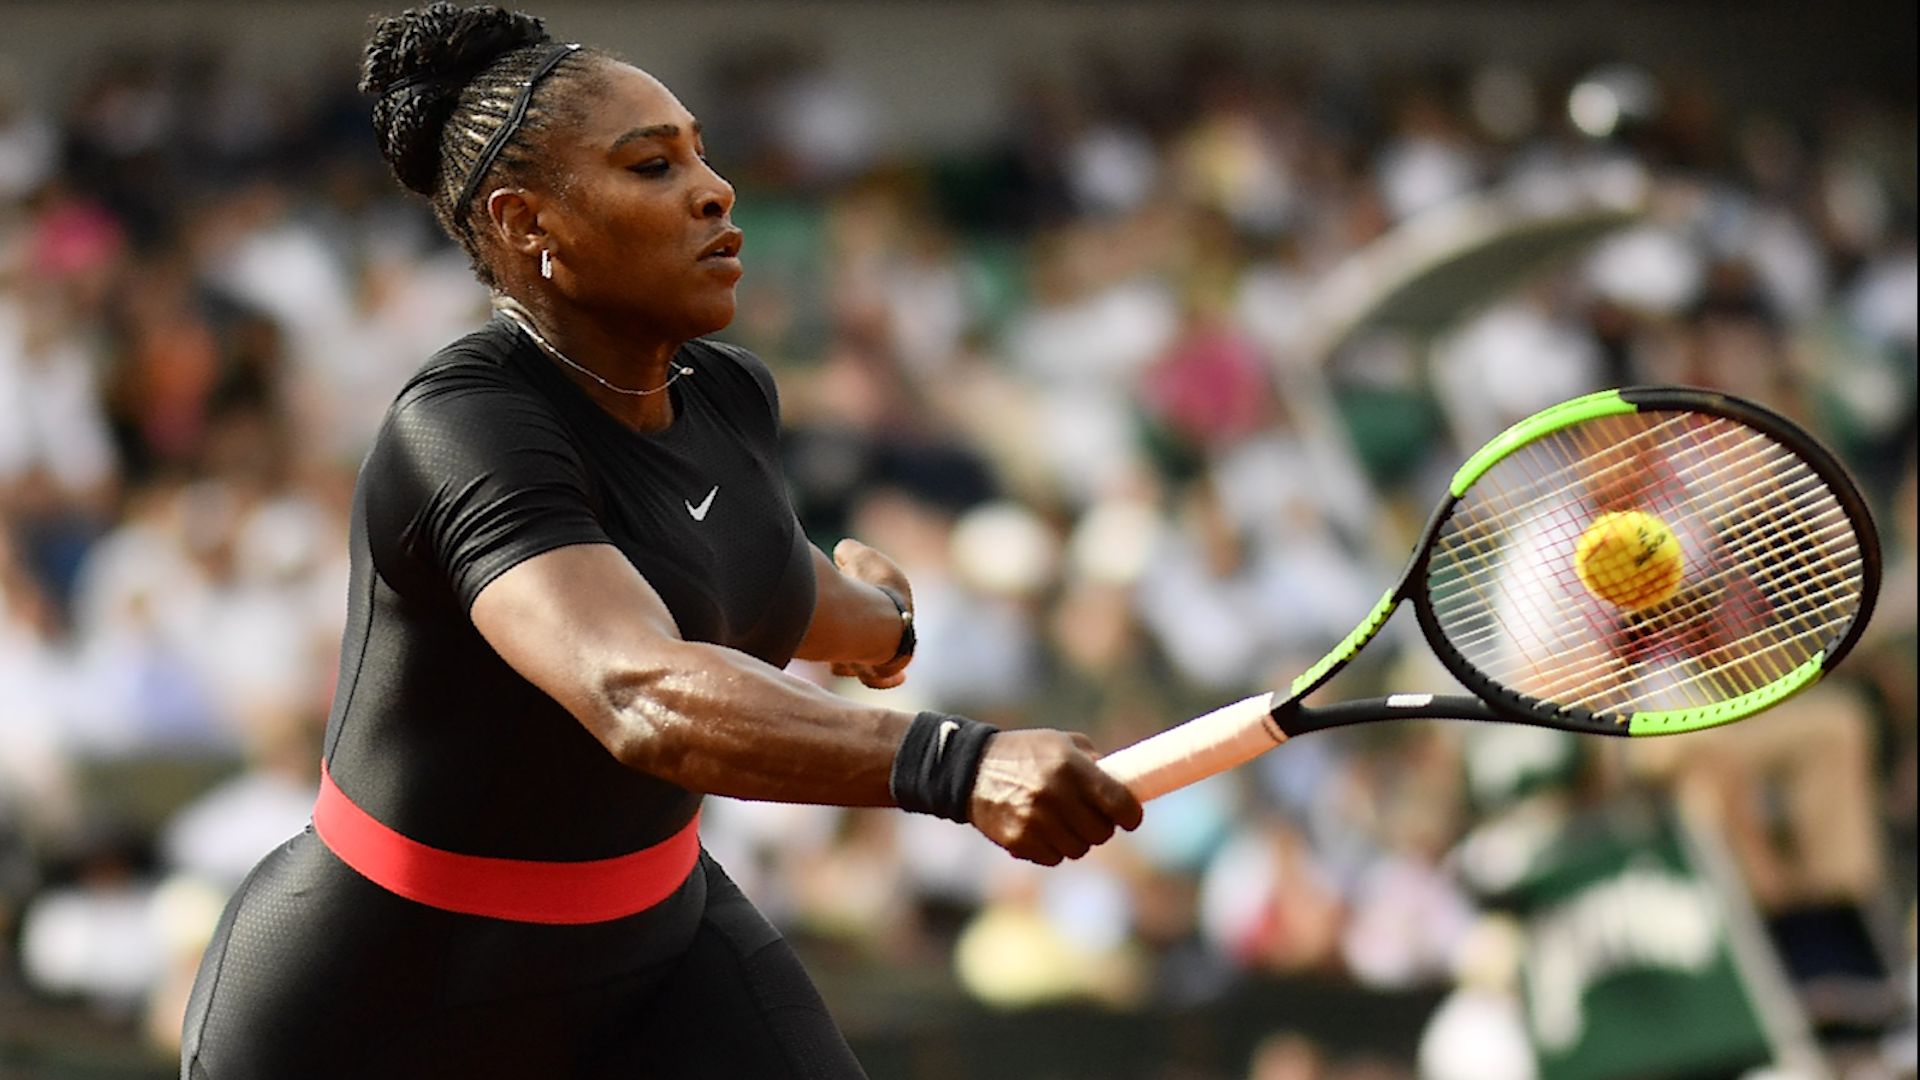 Serena Williams' catsuit ban: Why it matters, and what it says about |